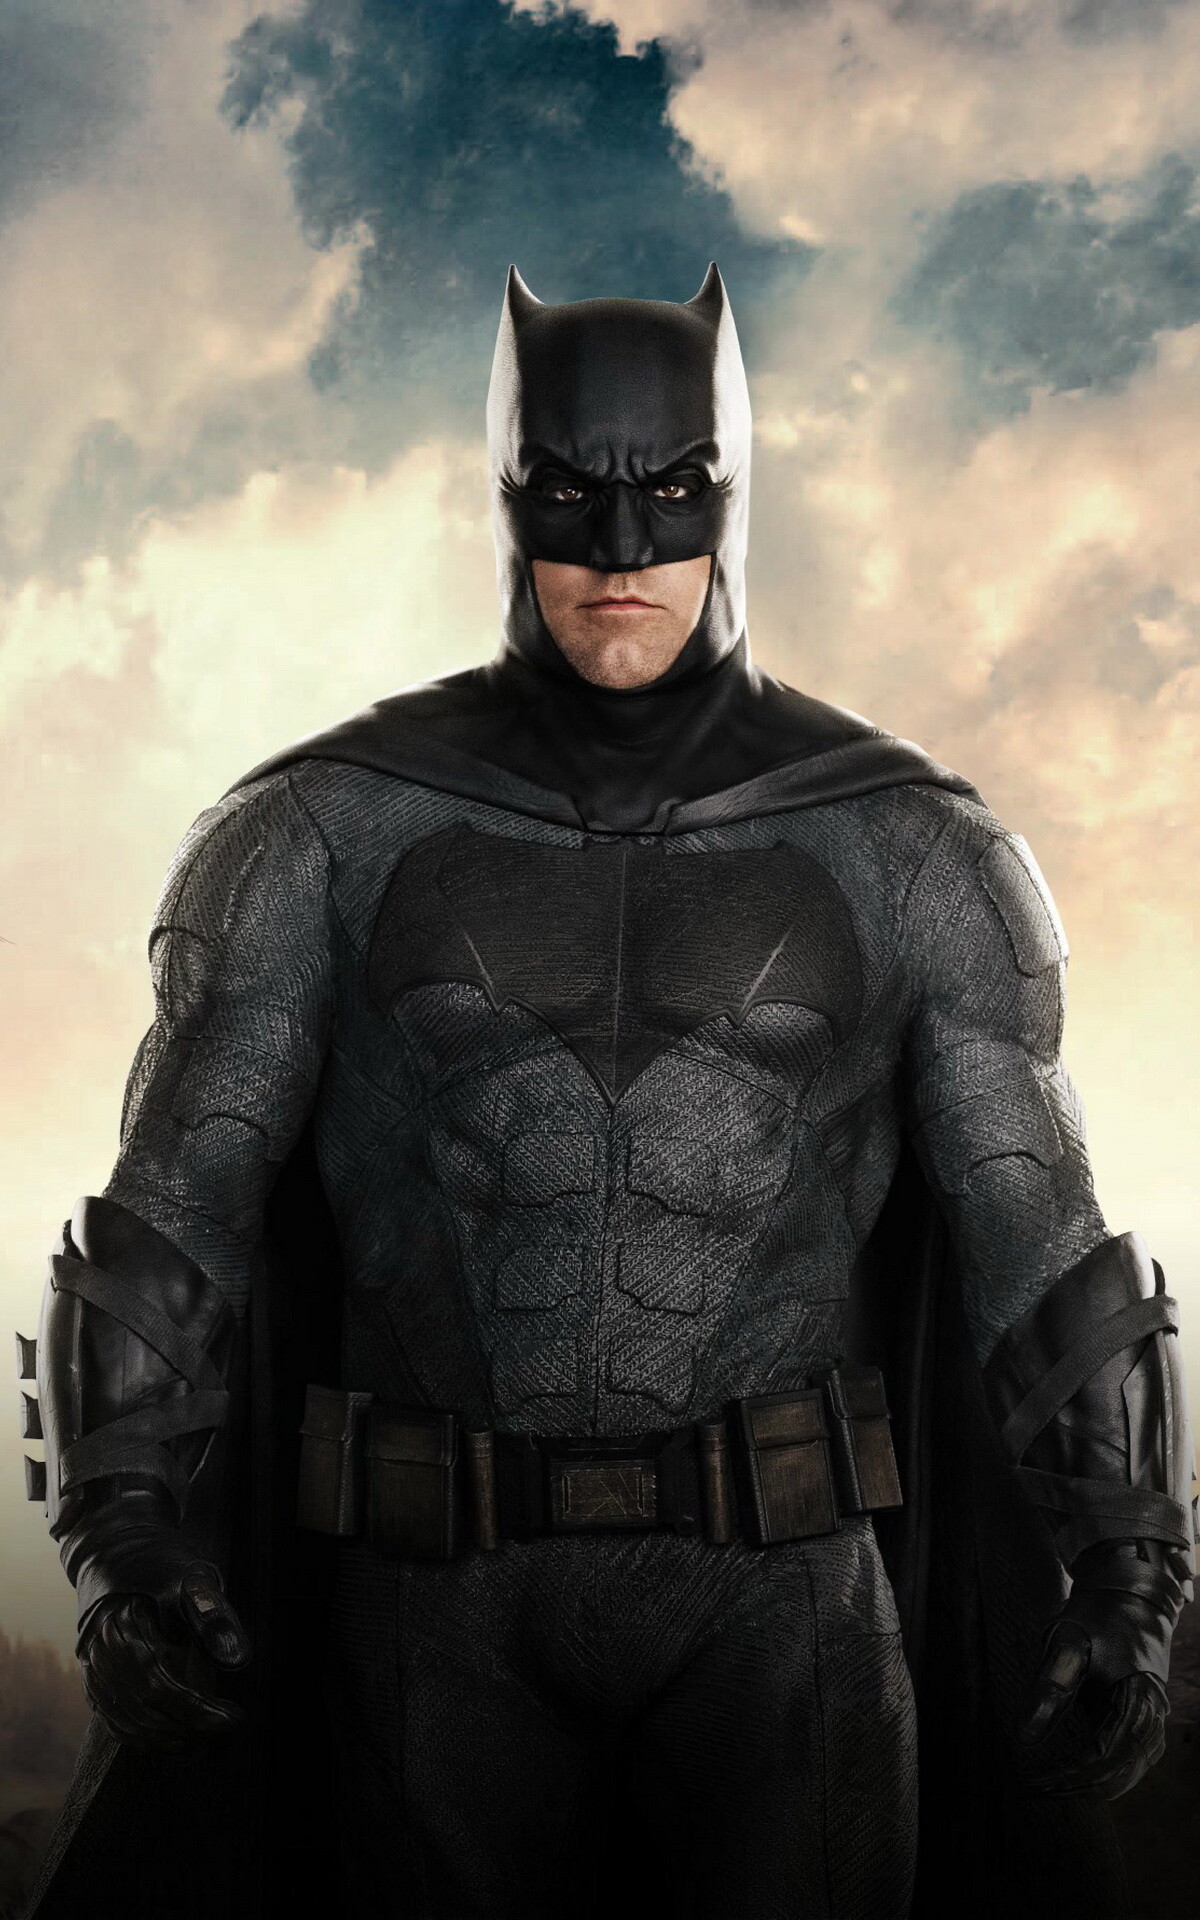 DC: Ben Affleck as Batman, protecting Gotham City from its criminal underworld as a highly trained, masked vigilante. 1200x1920 HD Wallpaper.